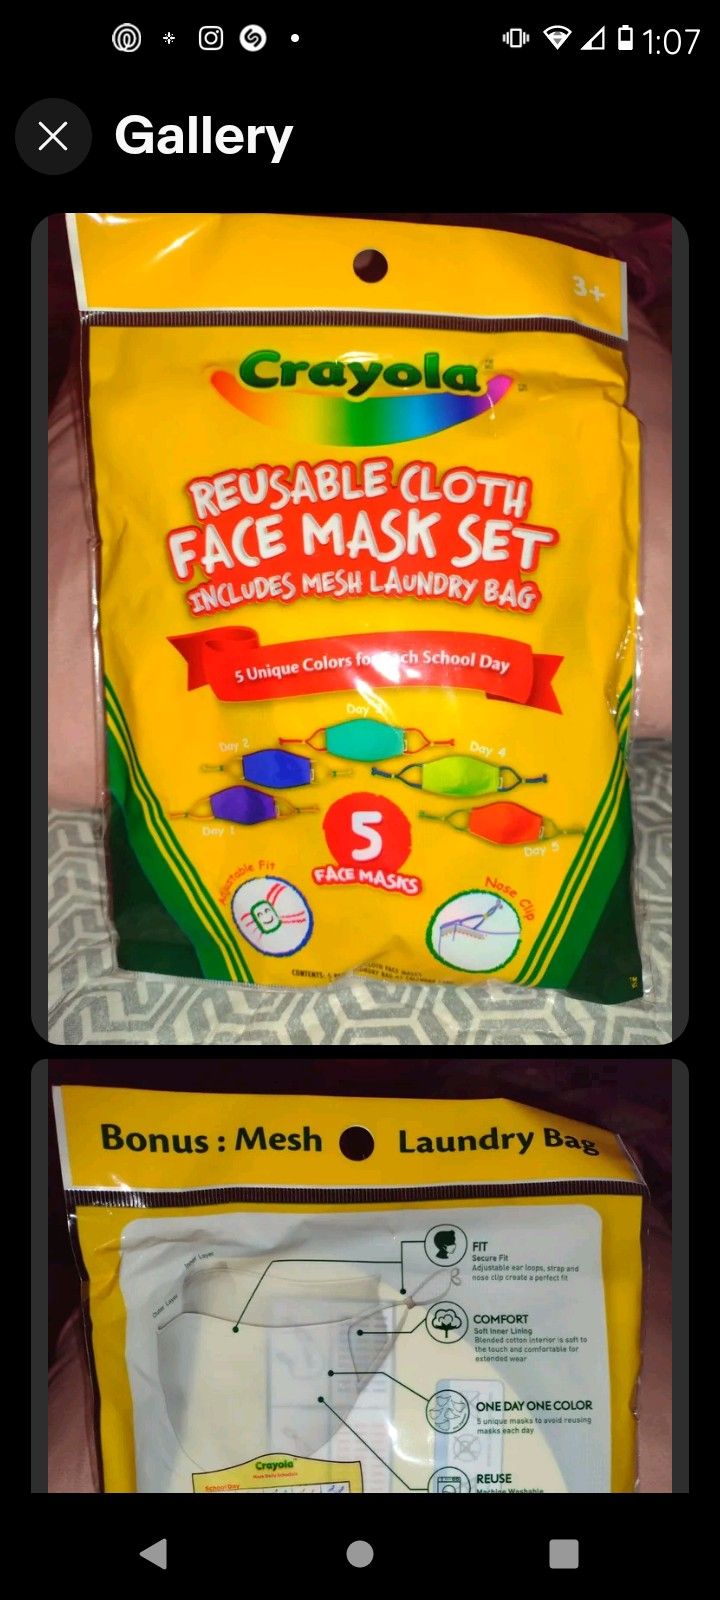 Crayola Reusable Face Mask Pack Of 5 (3 Total) $12 For The 3 Packs